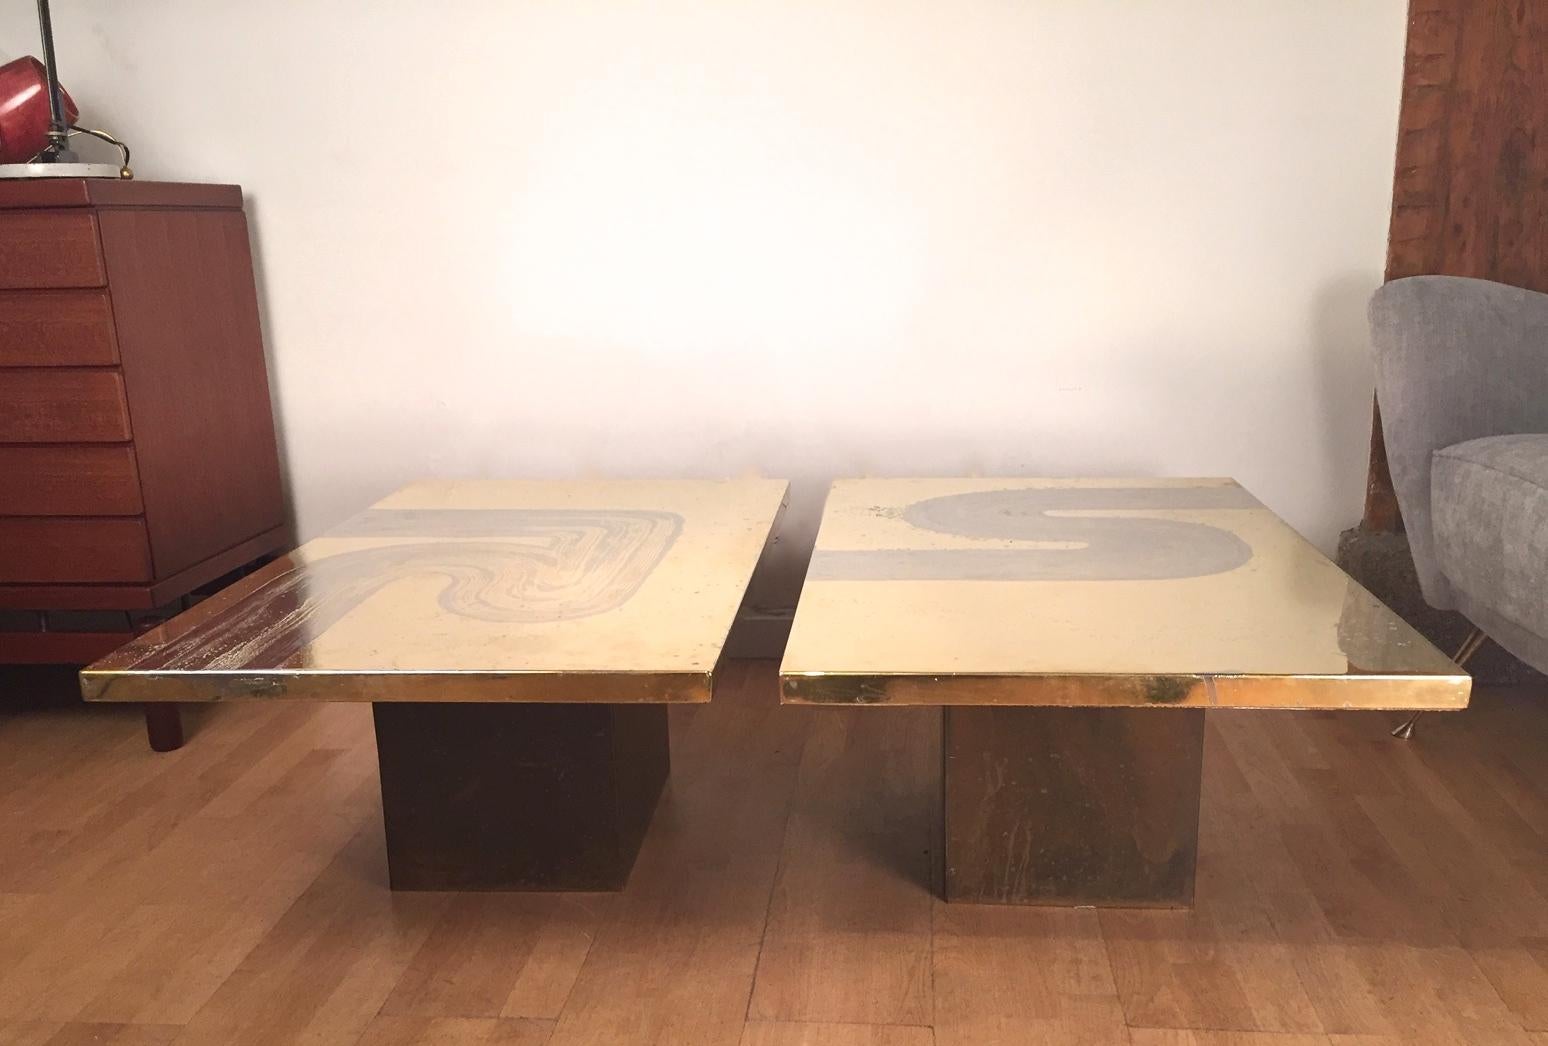 A pair of patinated brass coffee tables on enameled metal pedestals. Designed in 1070 by Belgian artist Christian Heckscher for Propoama. Signed 